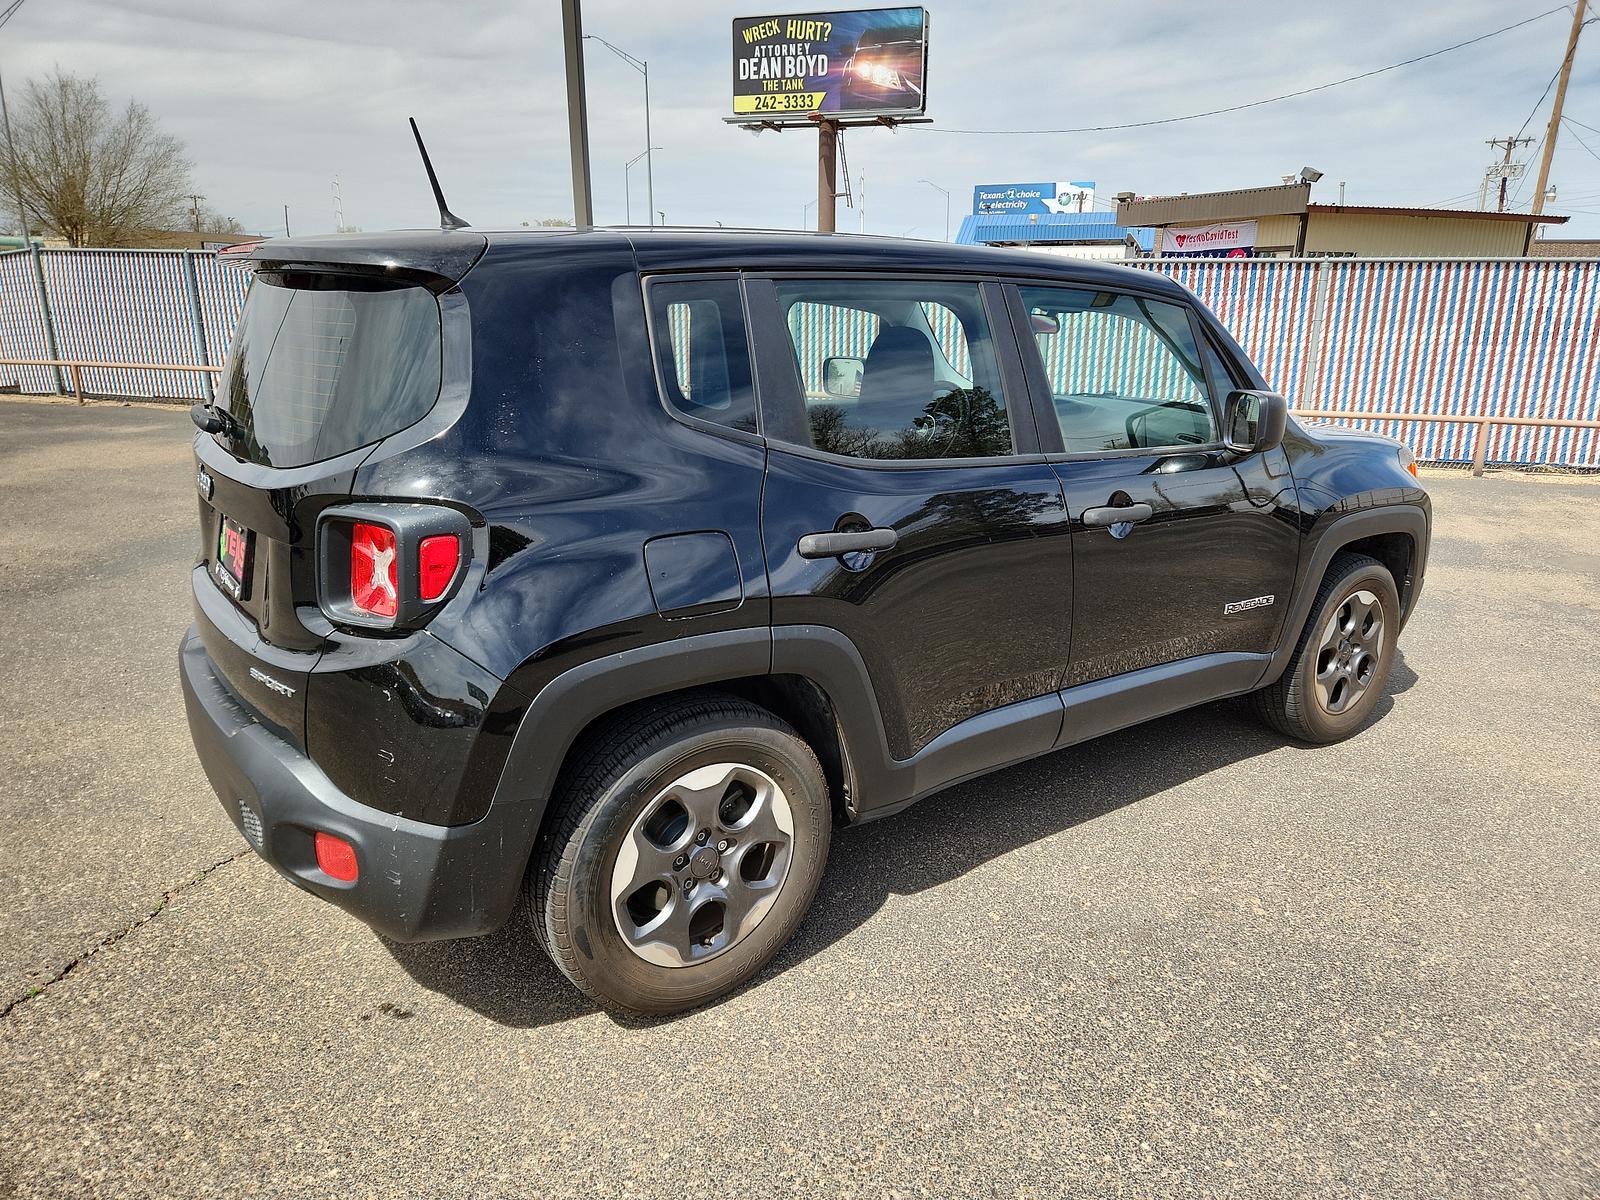 2015 BLACK JEEP RENEGADE SPORT (ZACCJAAT0FP) , located at 4110 Avenue Q, Lubbock, 79412, 33.556553, -101.855820 - Photo #3